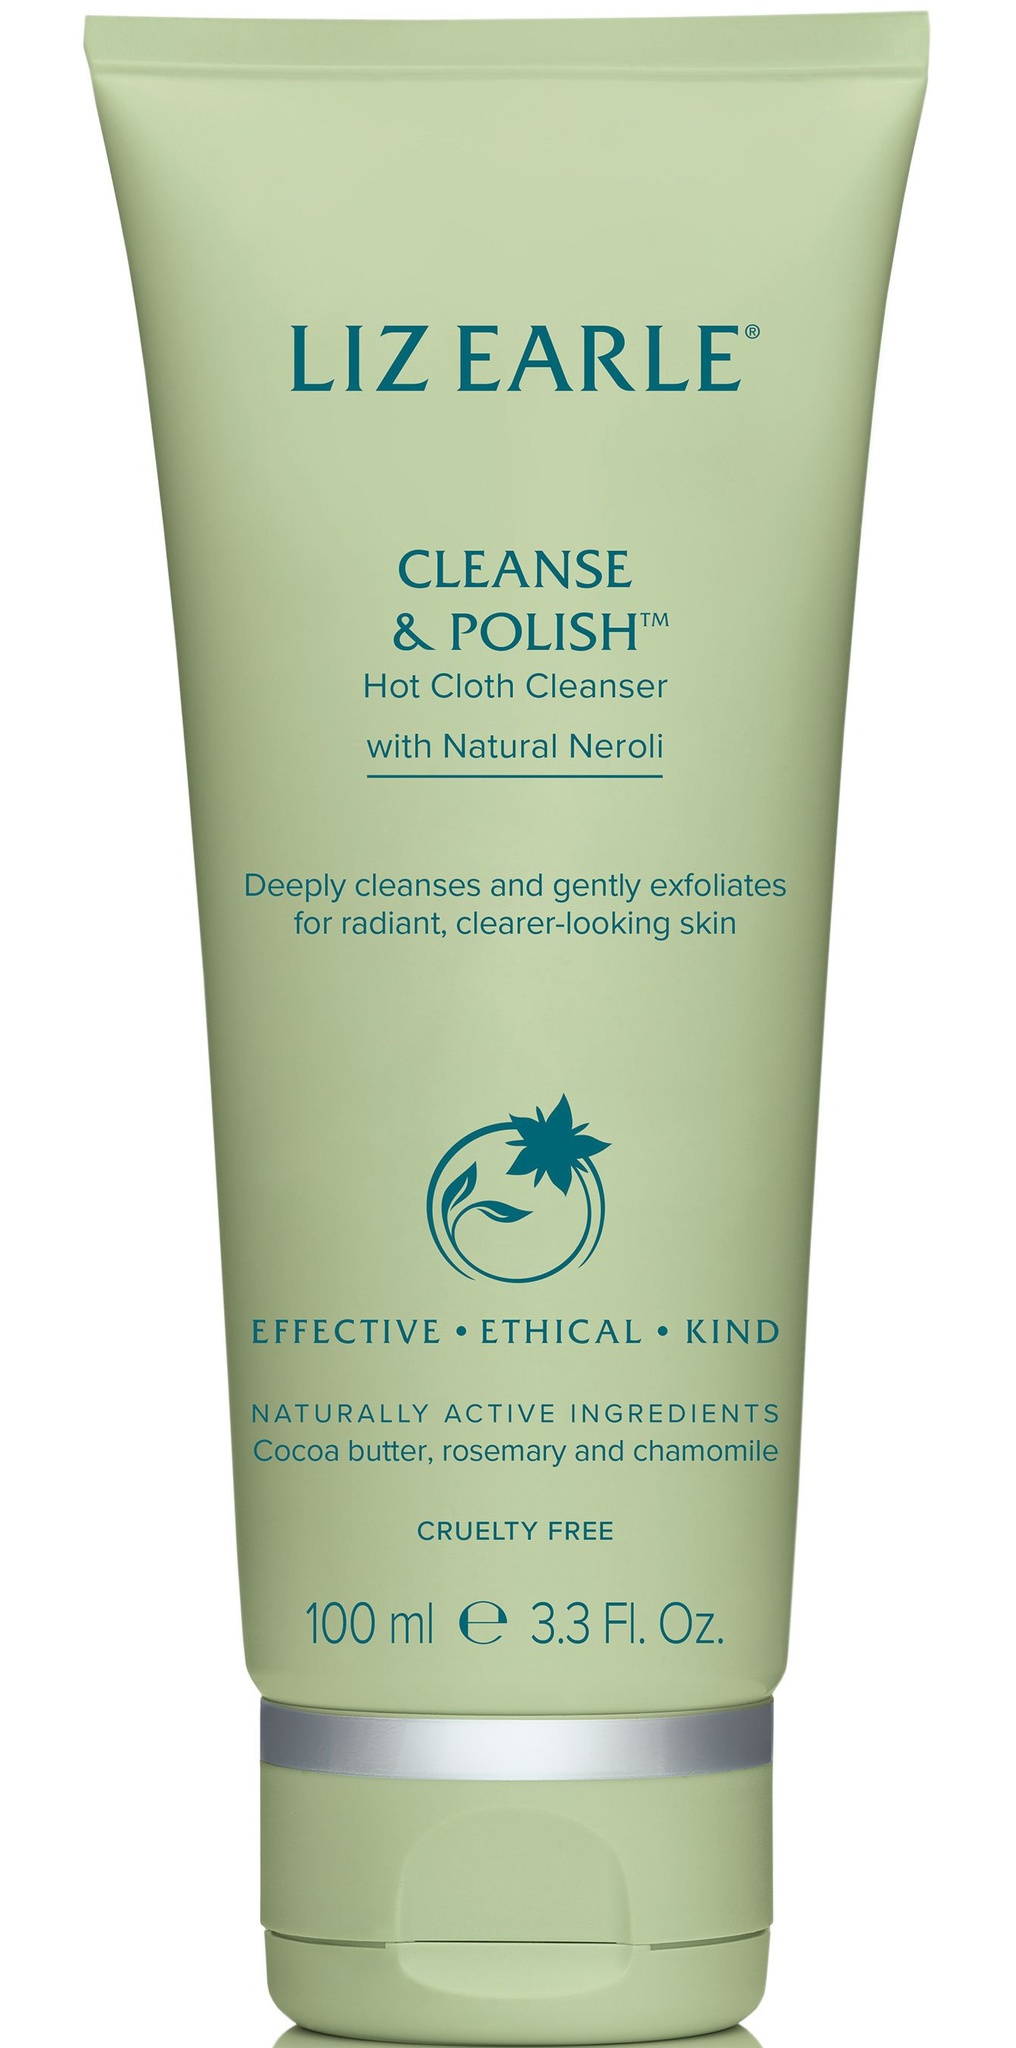 Liz Earle Cleanse & Polish™ Hot Cloth Cleanser With Natural Neroli